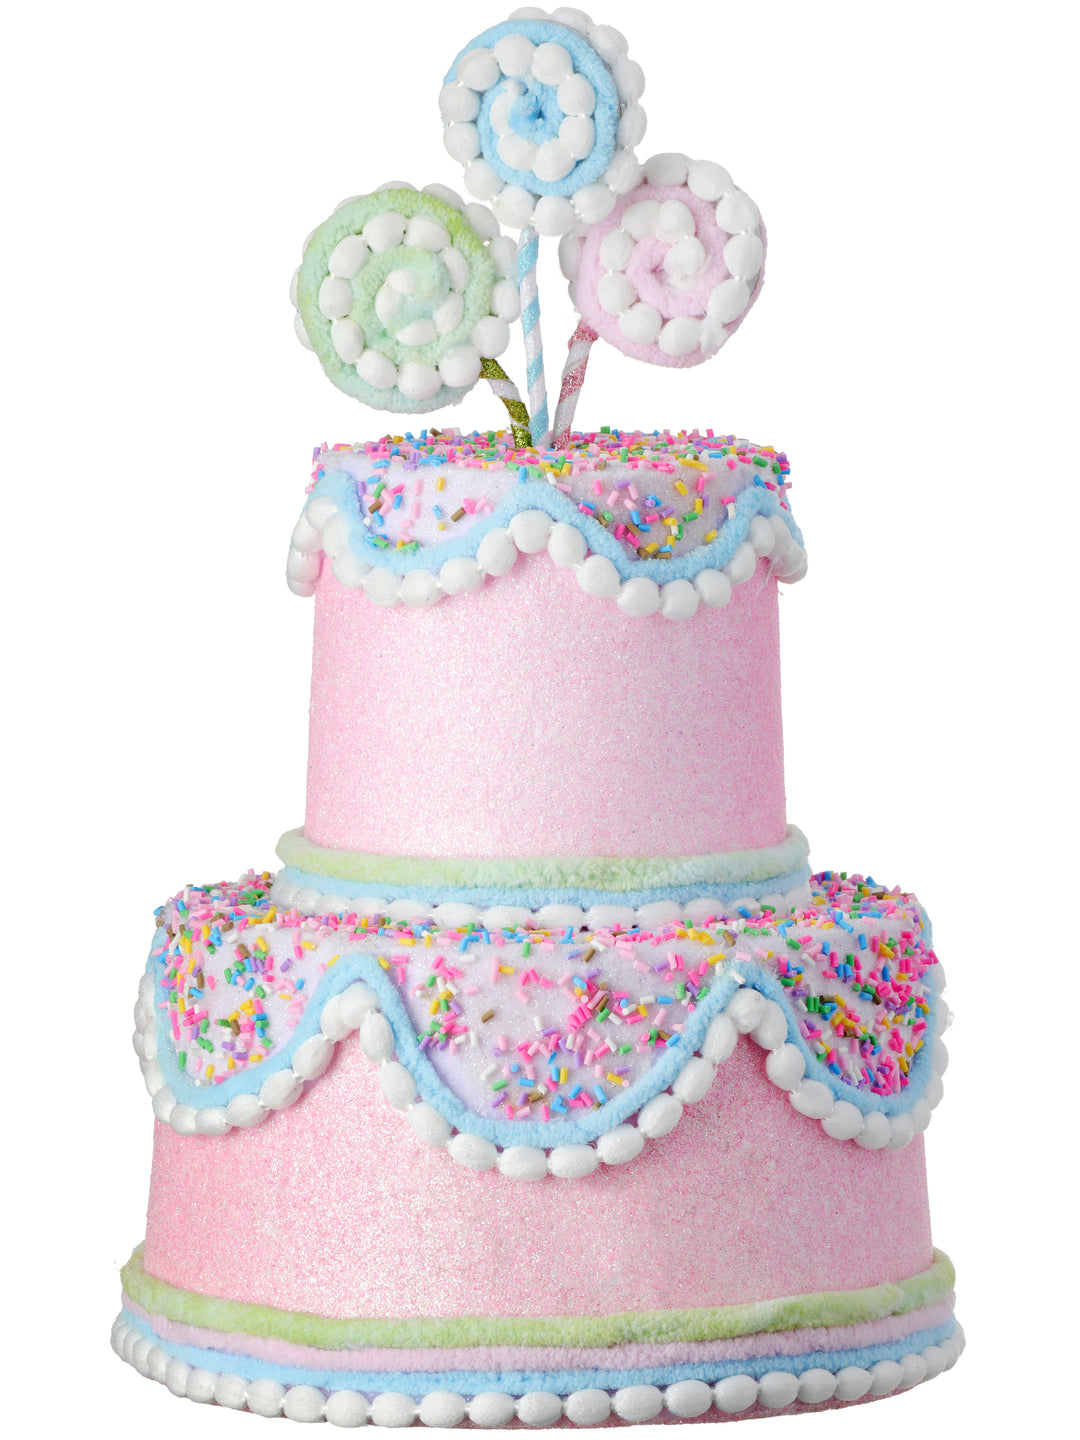 Regency 13" Pastel Candy Decorated Cake in Pink/Mint